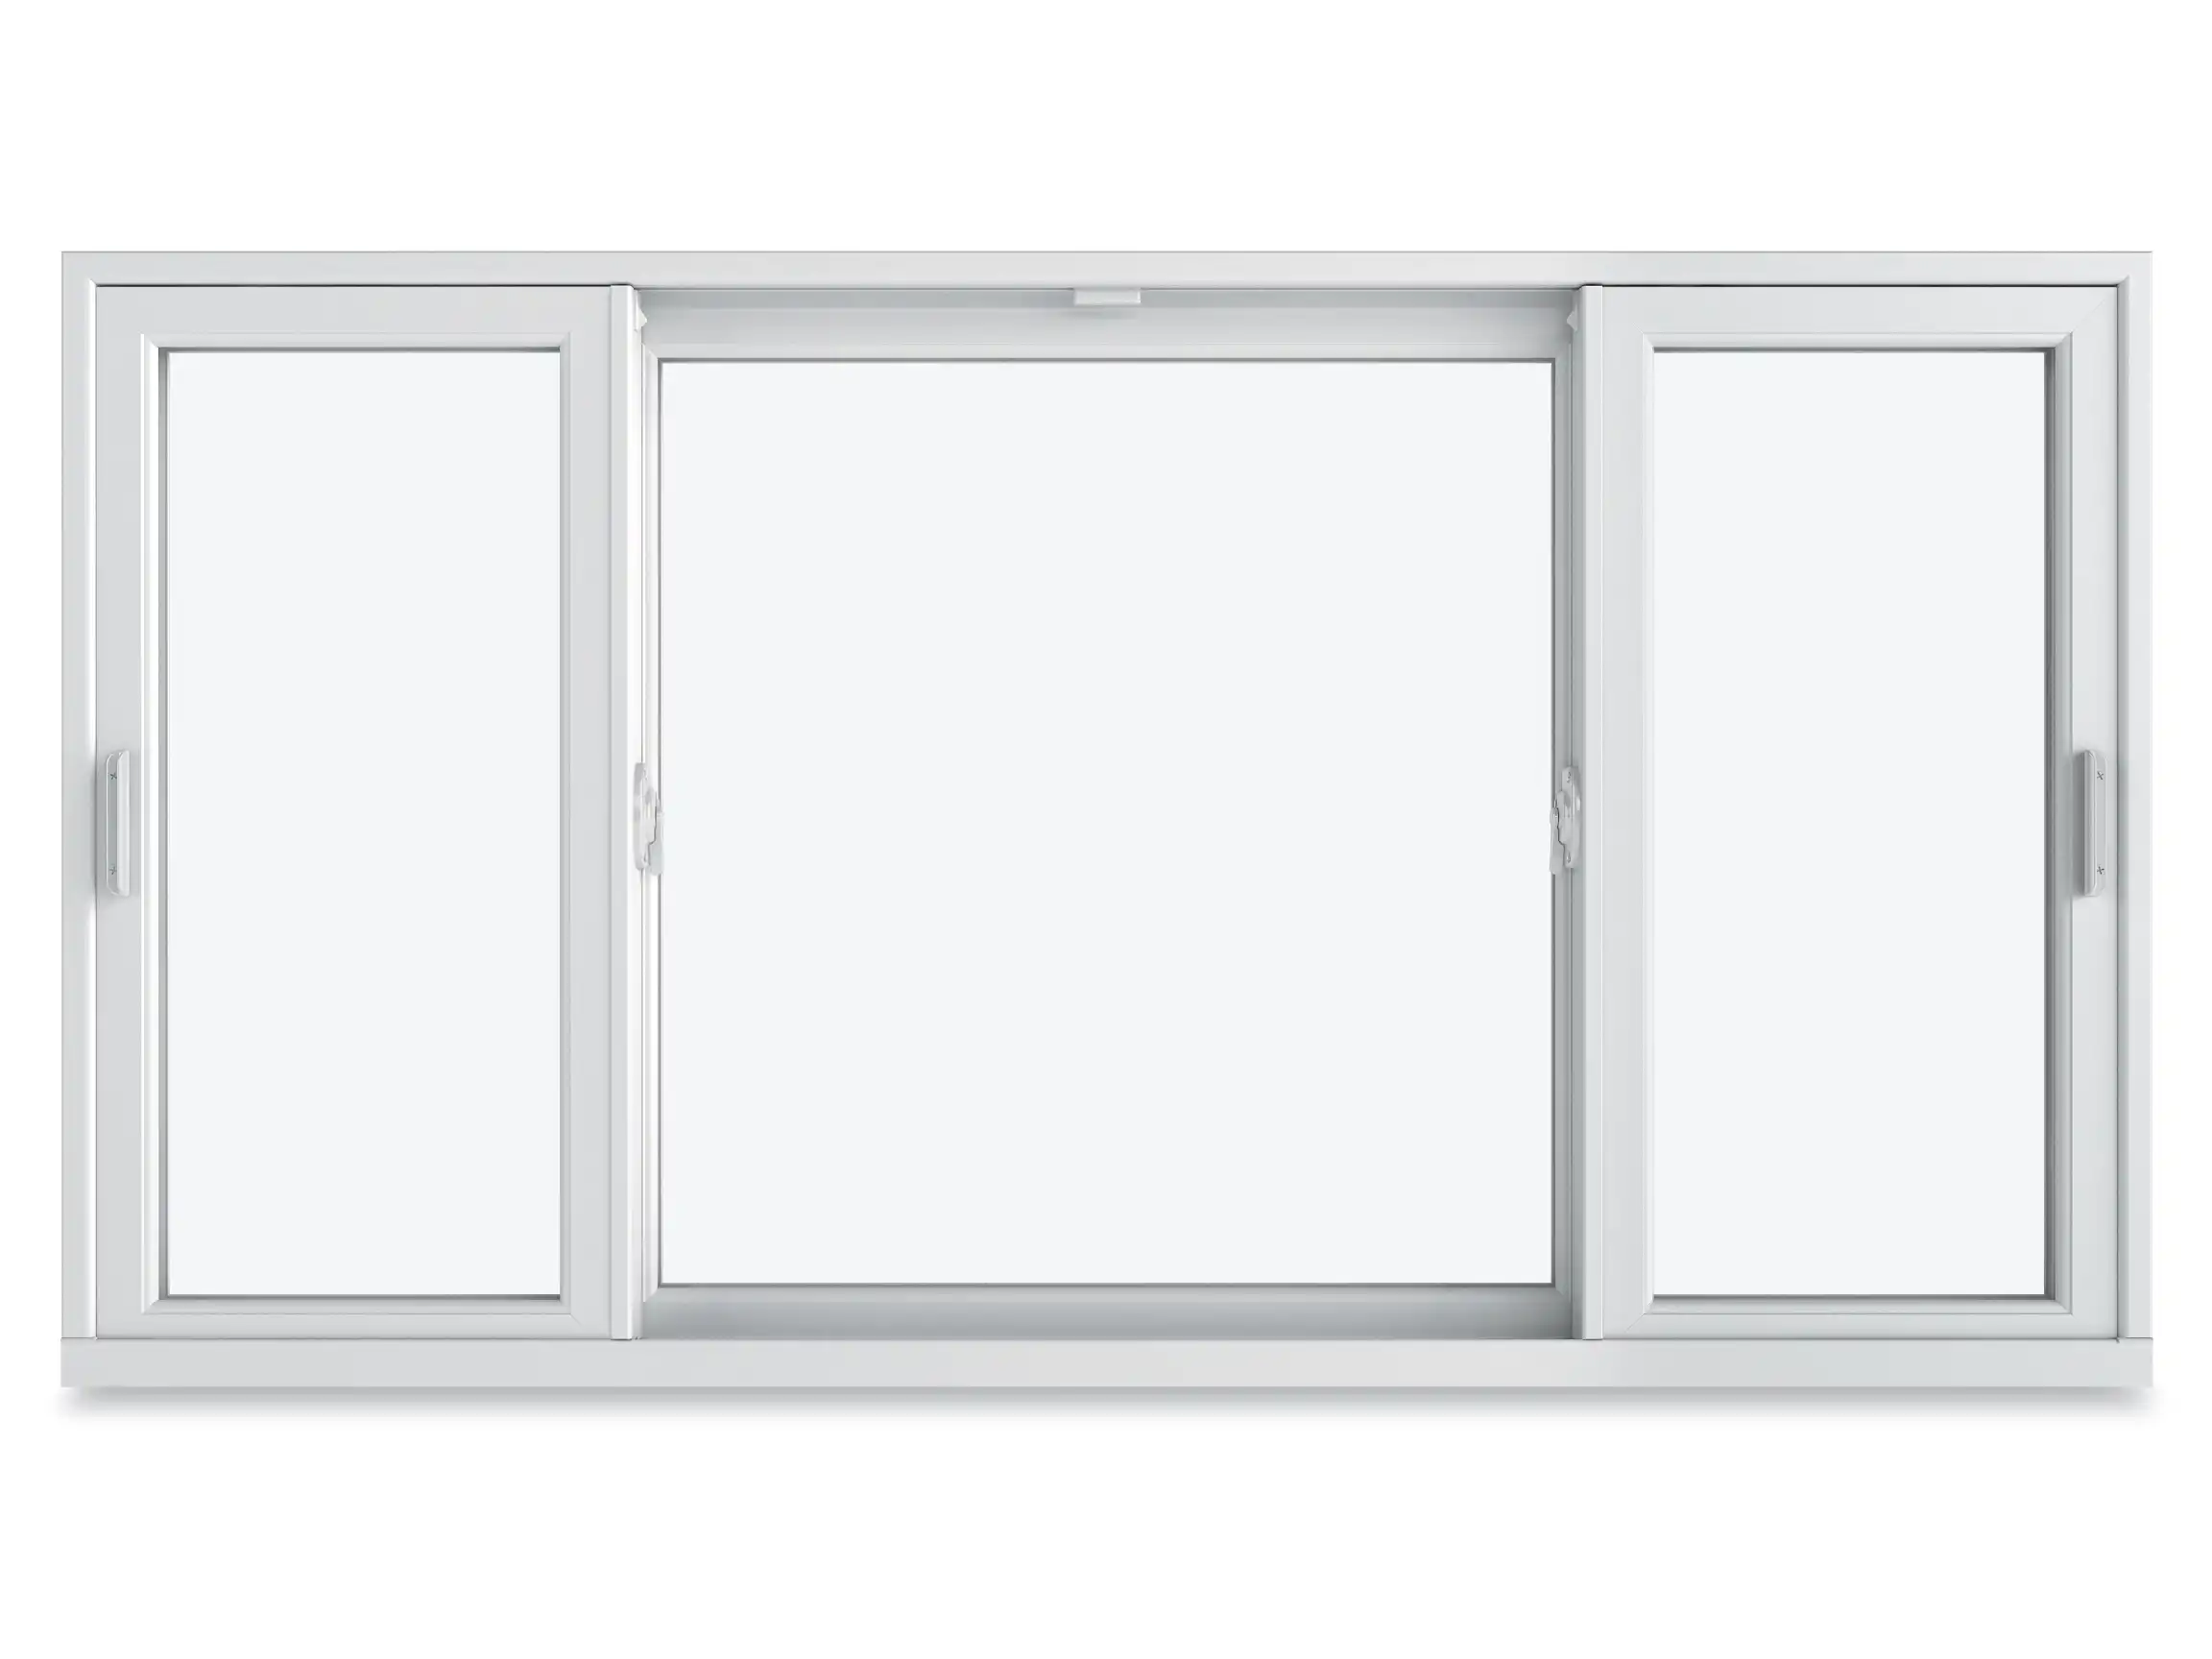 Image of a Marvin Replacement Unequal Size Triple Sash Slider window.